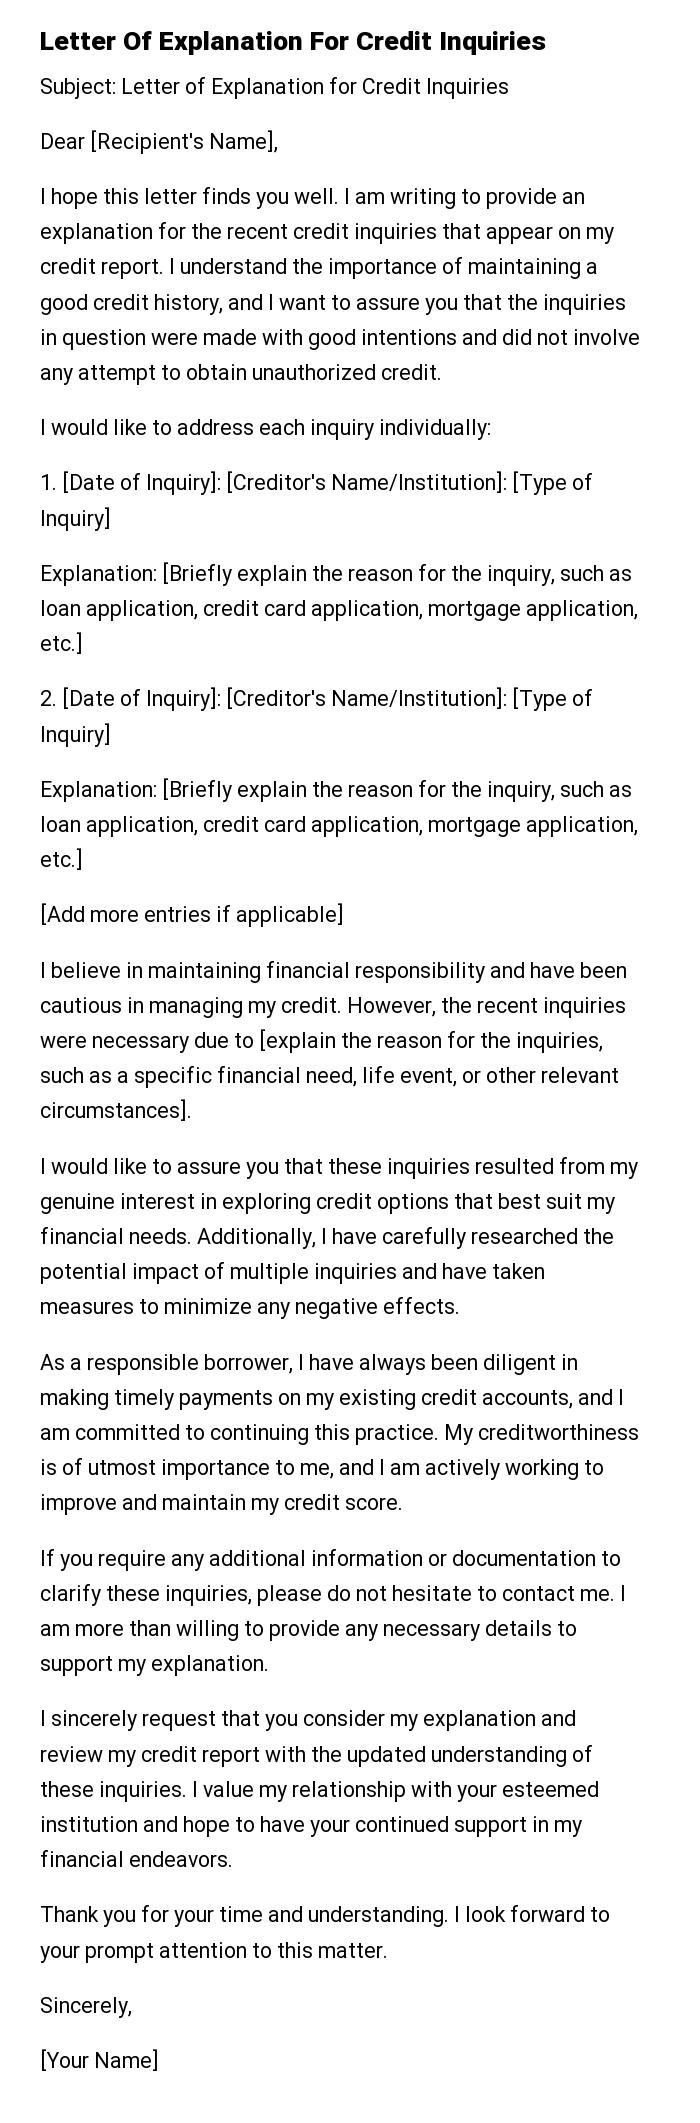 Letter Of Explanation For Credit Inquiries